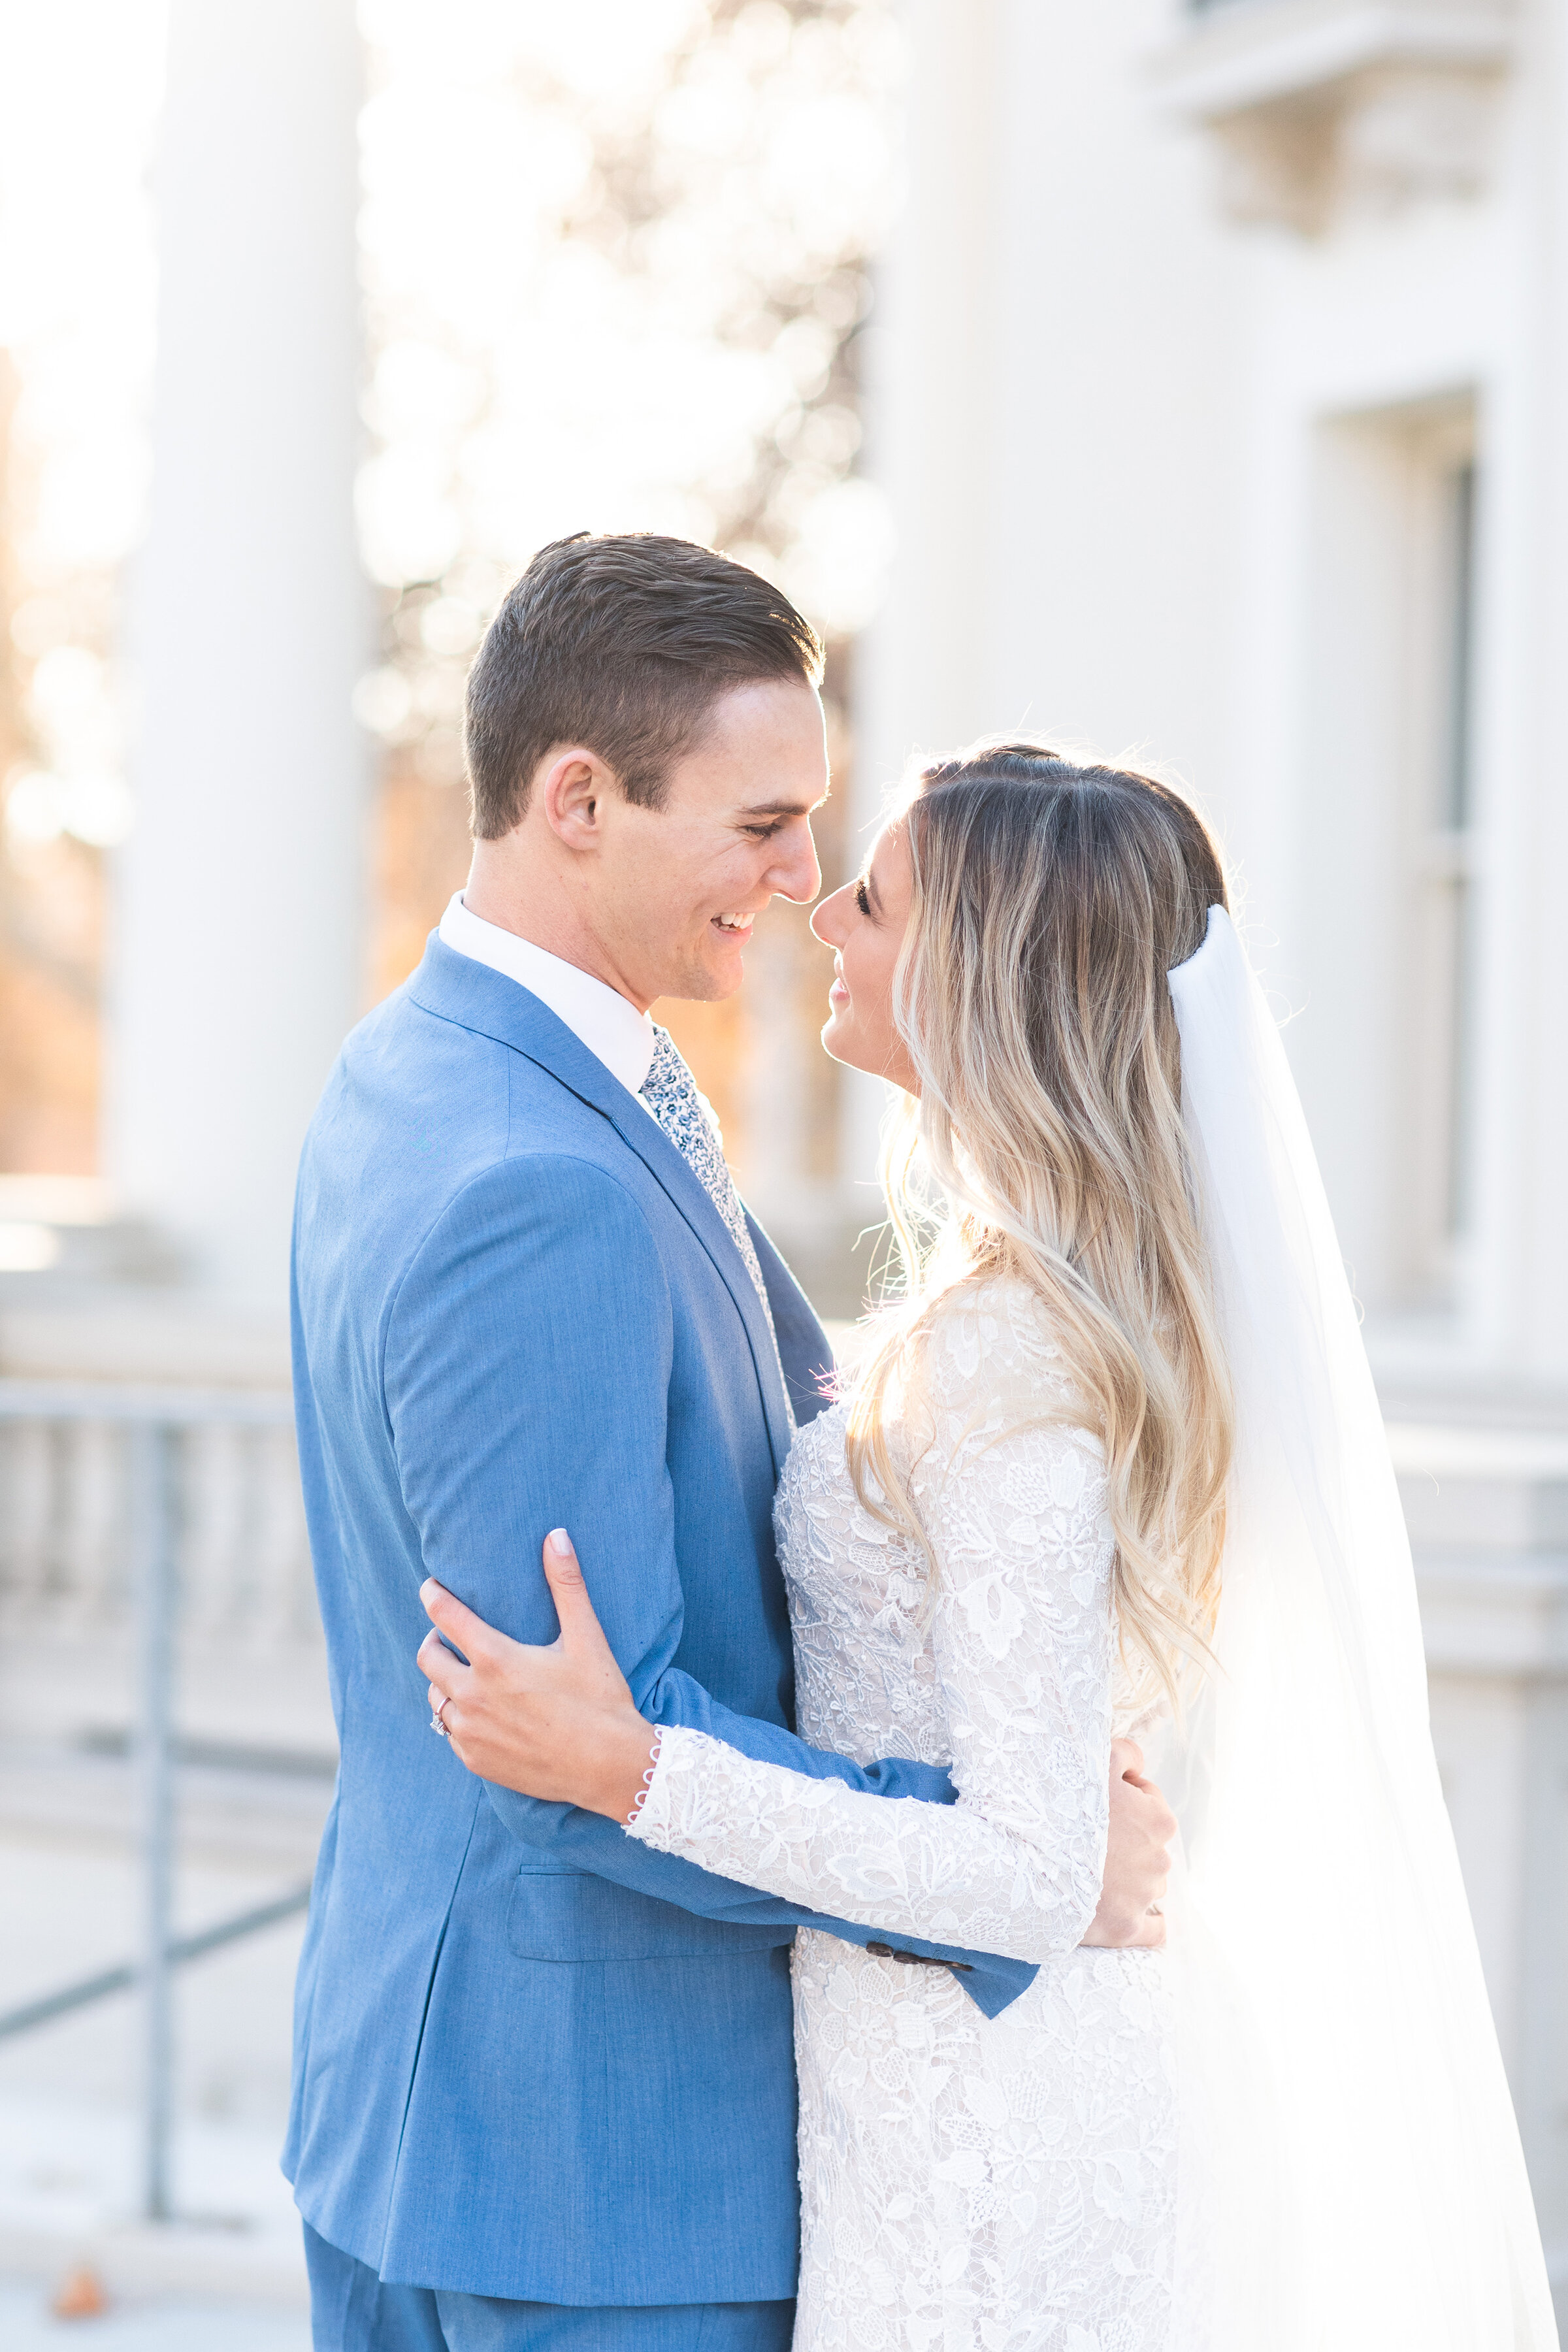  With beautiful stone pillars in the background, Clarity Lane Photography photographs a romantic exchange between this soon to be bride and groom in Salt Lake City, Utah. professional salt lake county wedding photographer, bright and airy photography